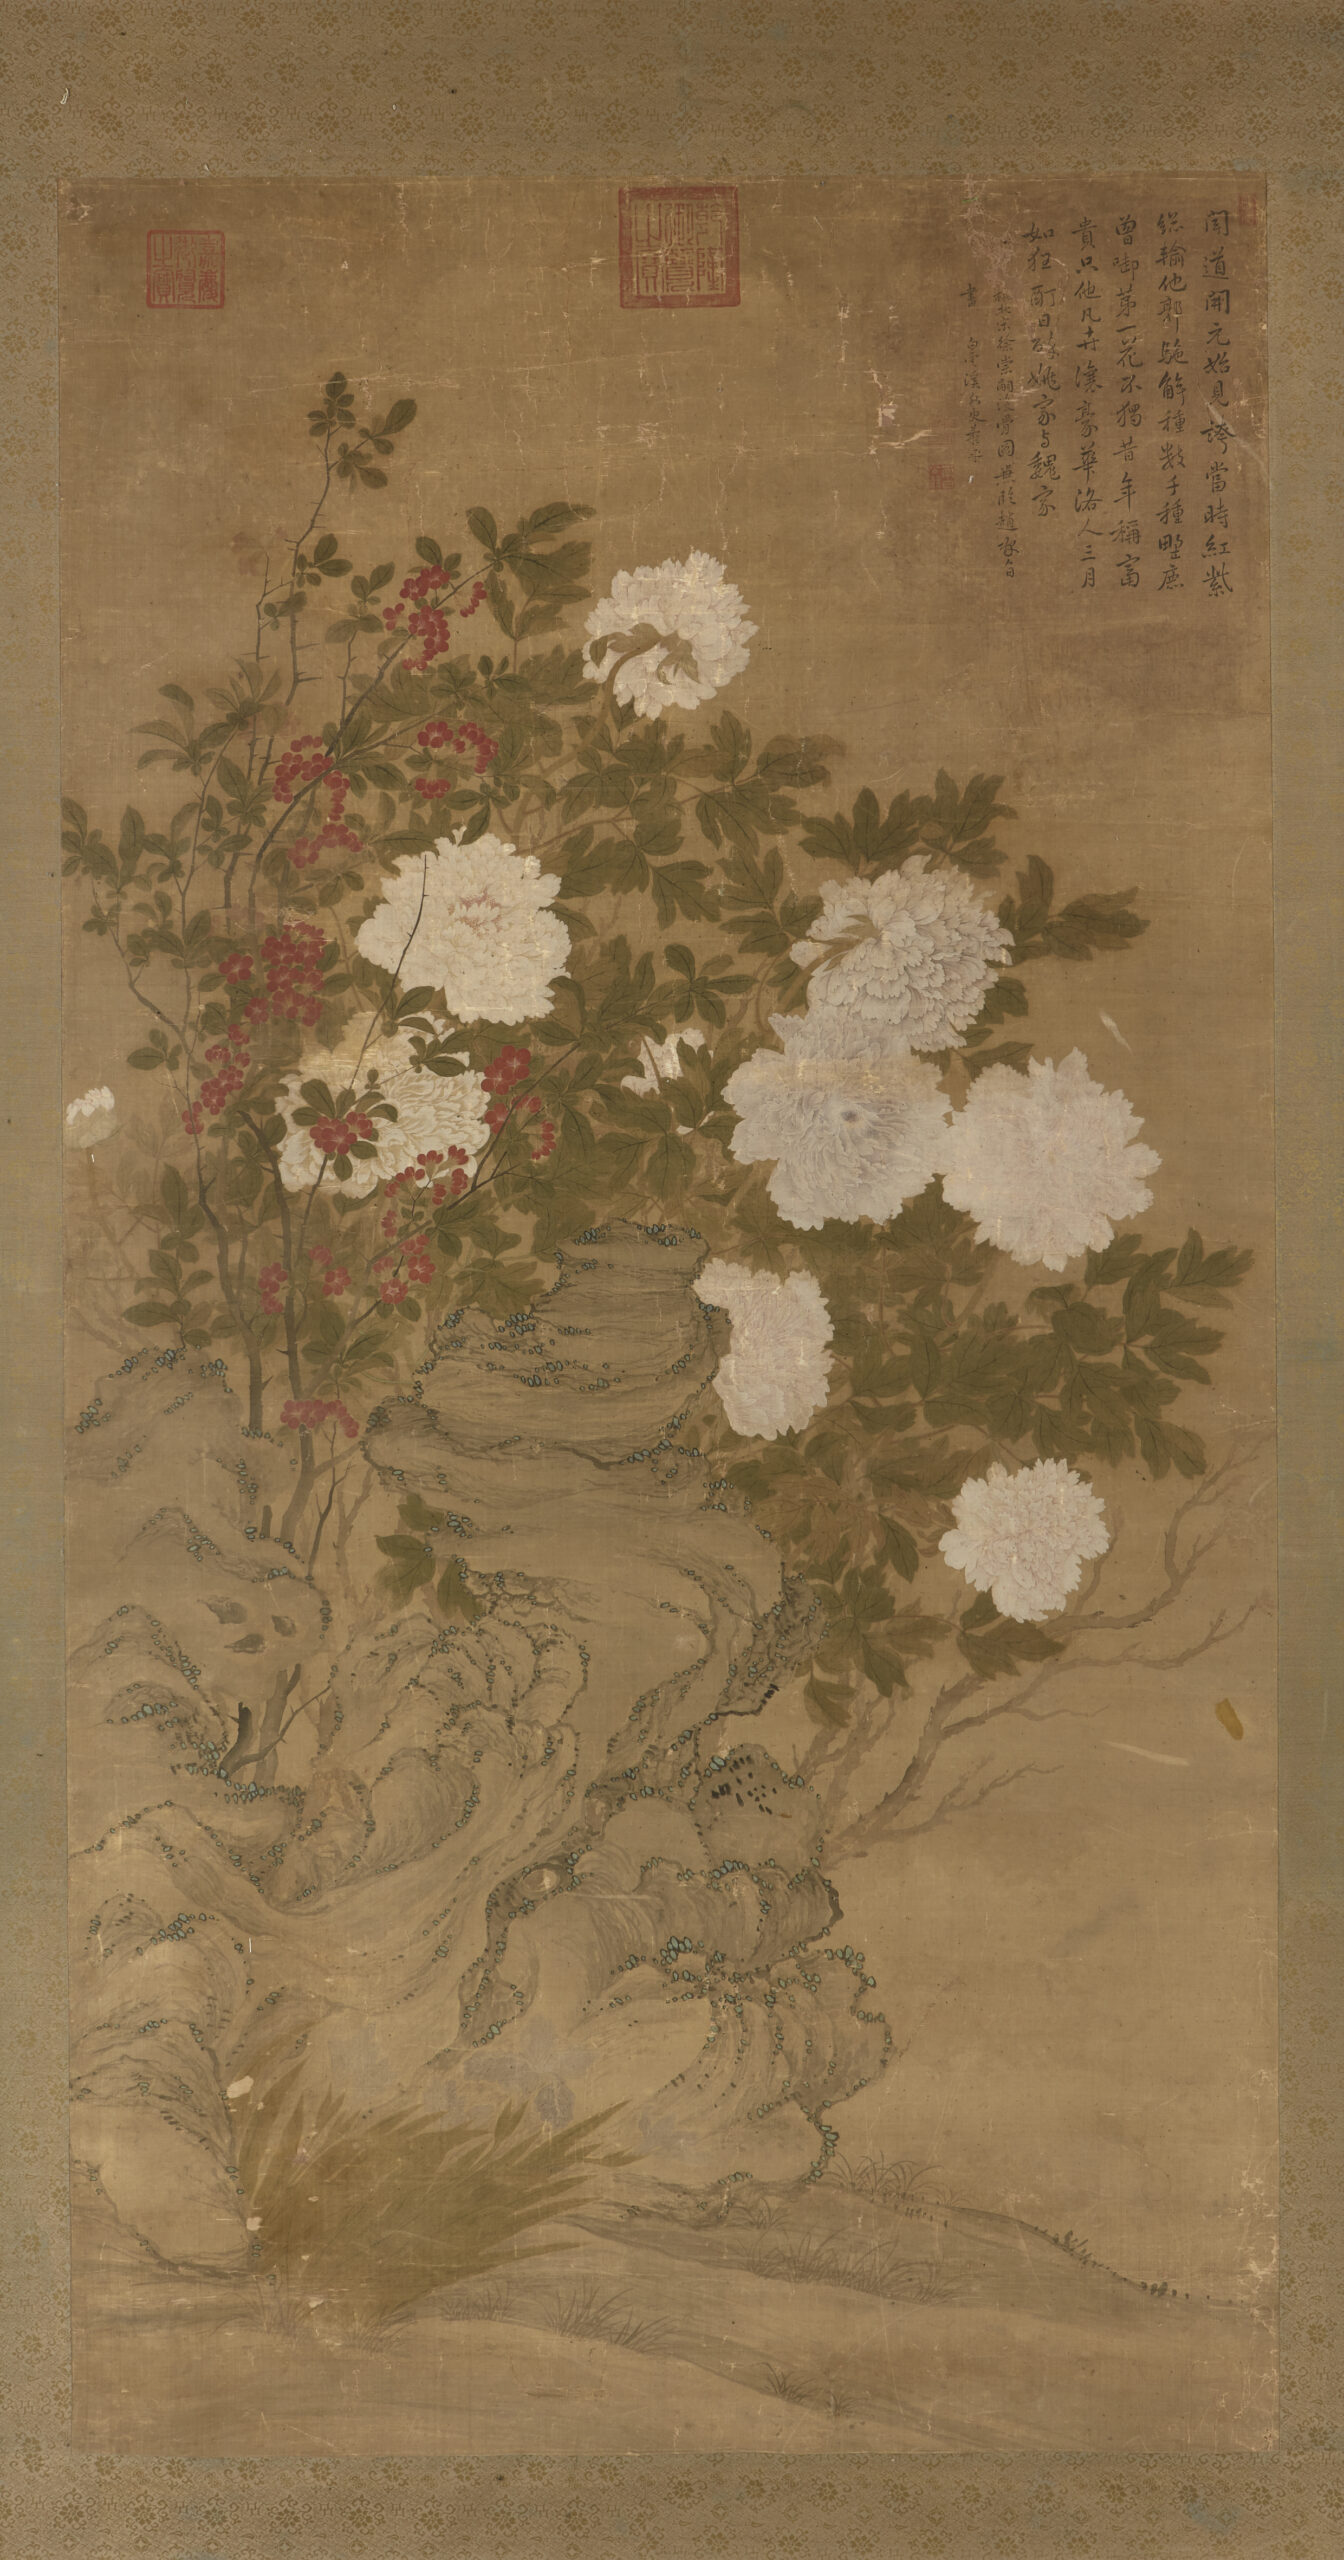 Yun Shouping (attributed to, 1633 – 1690), Peonies, framed, part of a hanging scroll with silk mount, ink and colour on silk